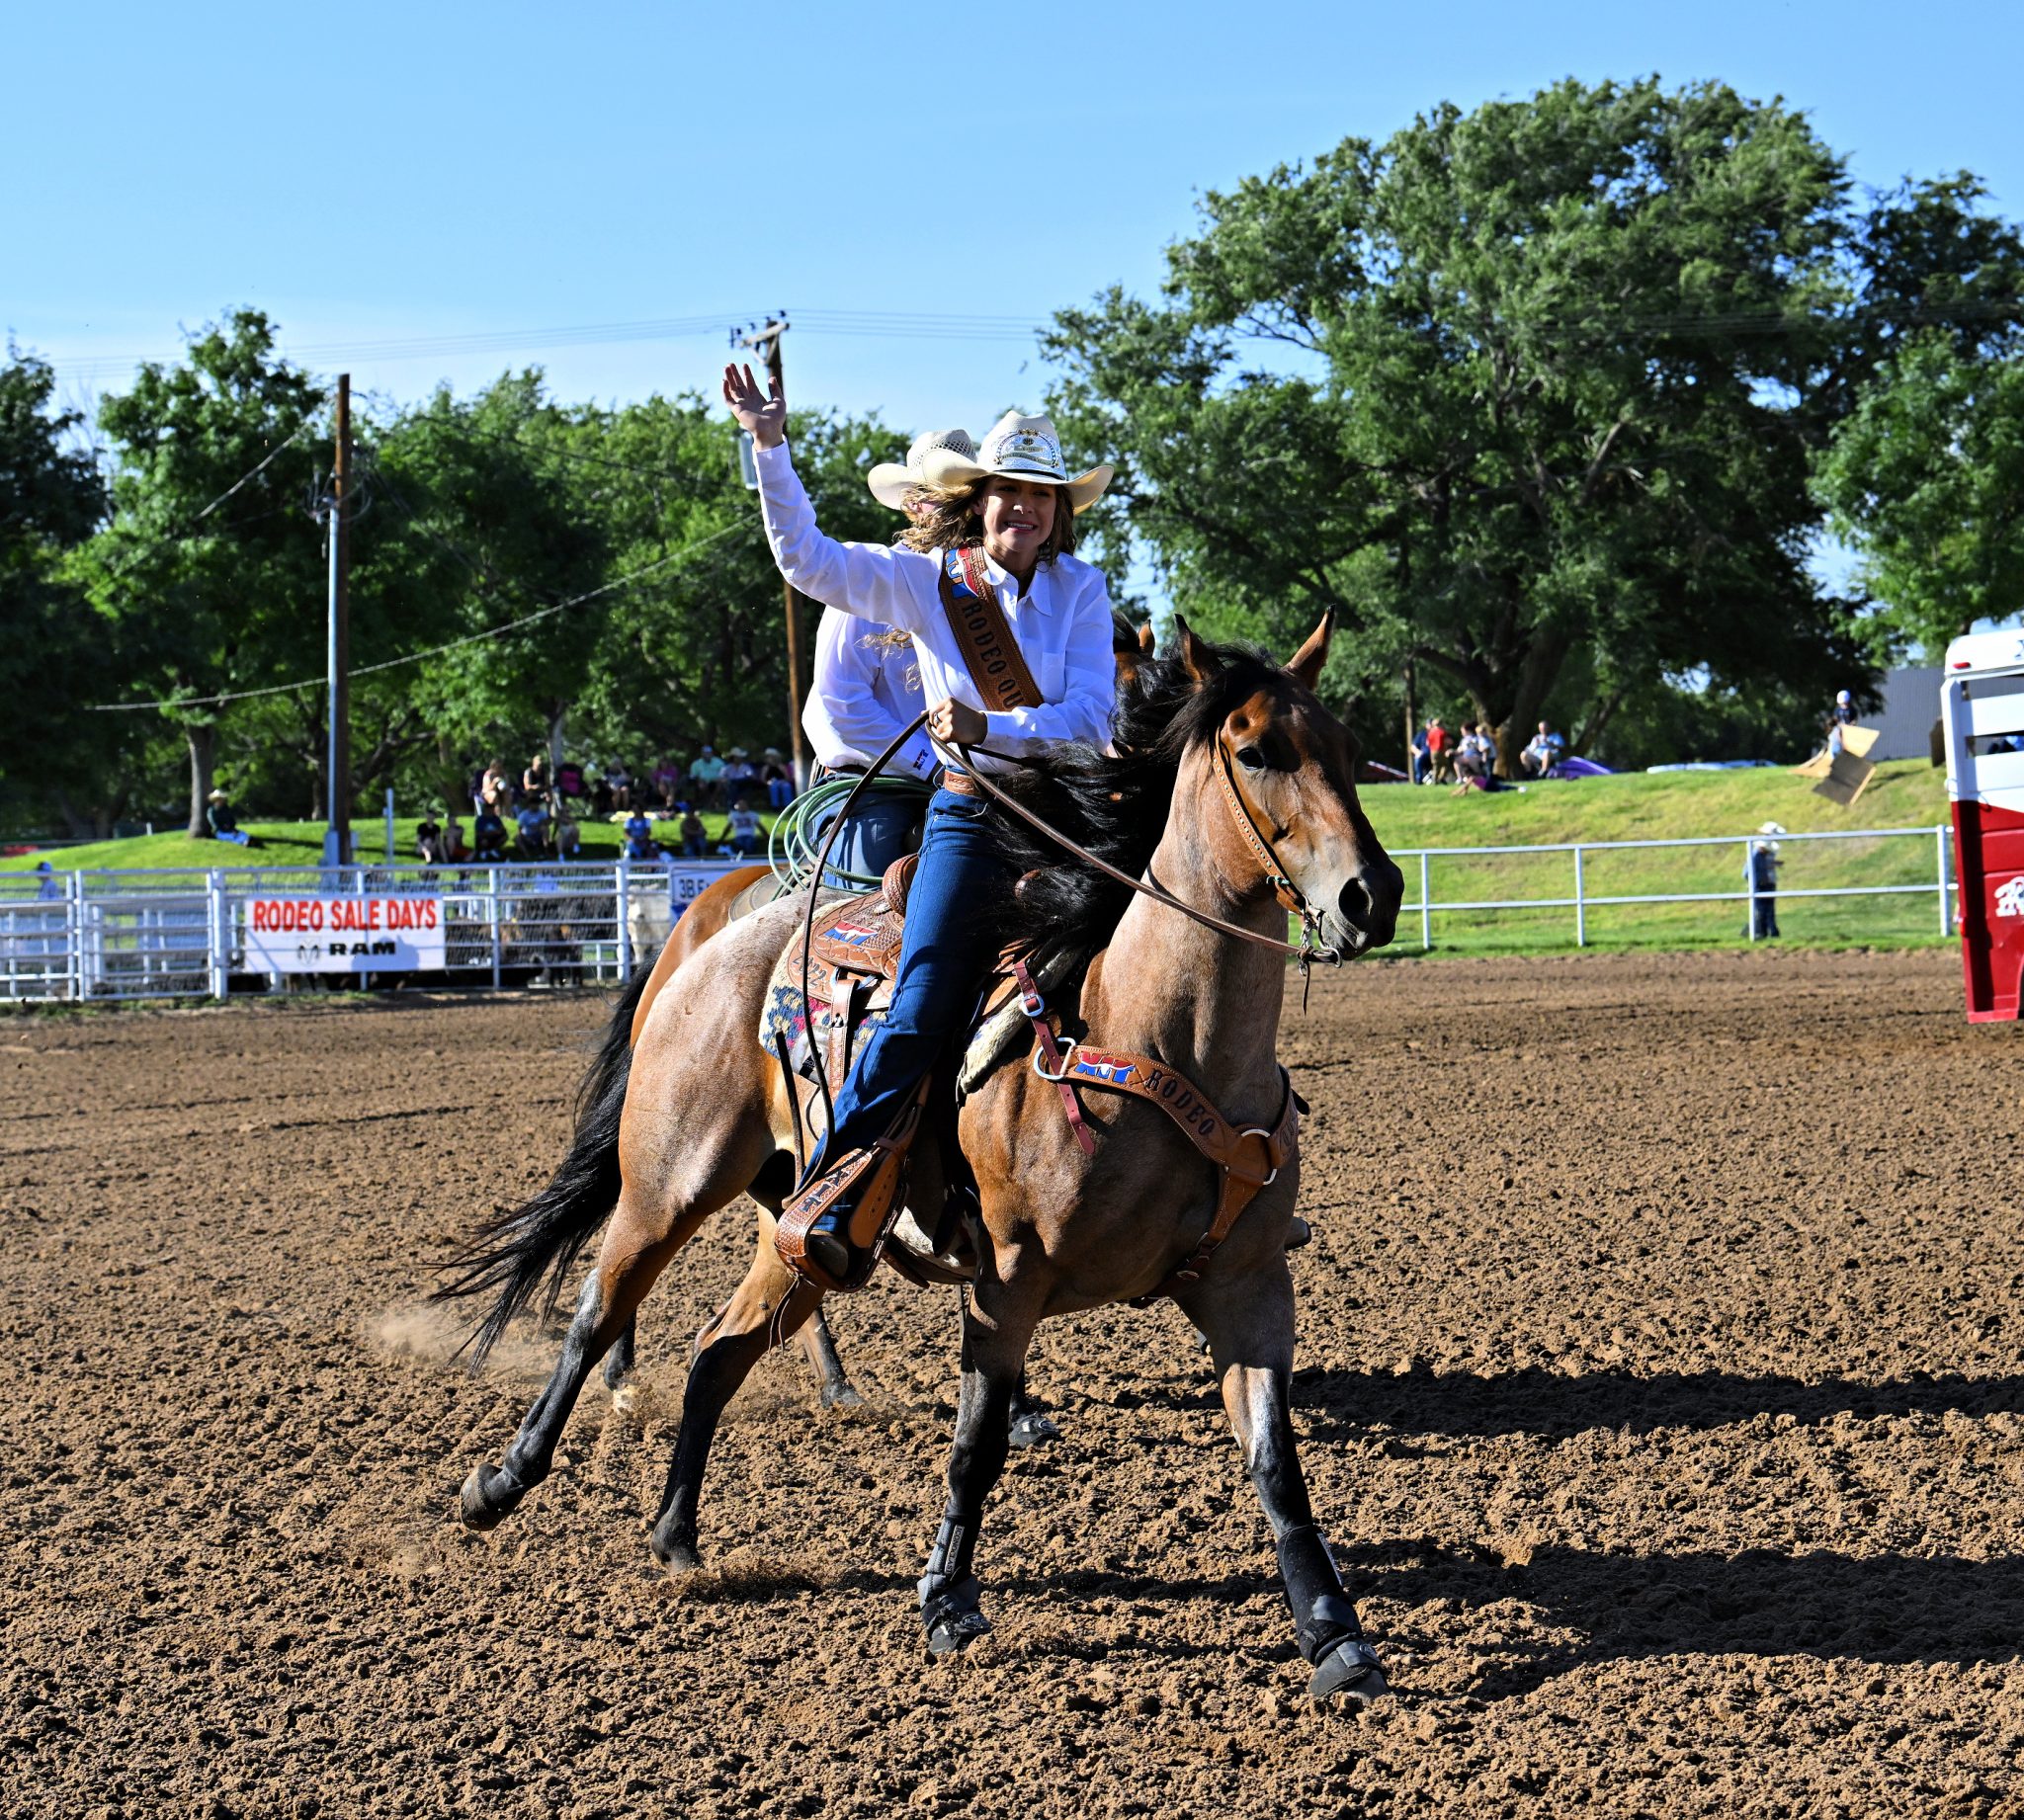 XIT Rodeo Queen Preslie Poling XIT Rodeo & Reunion